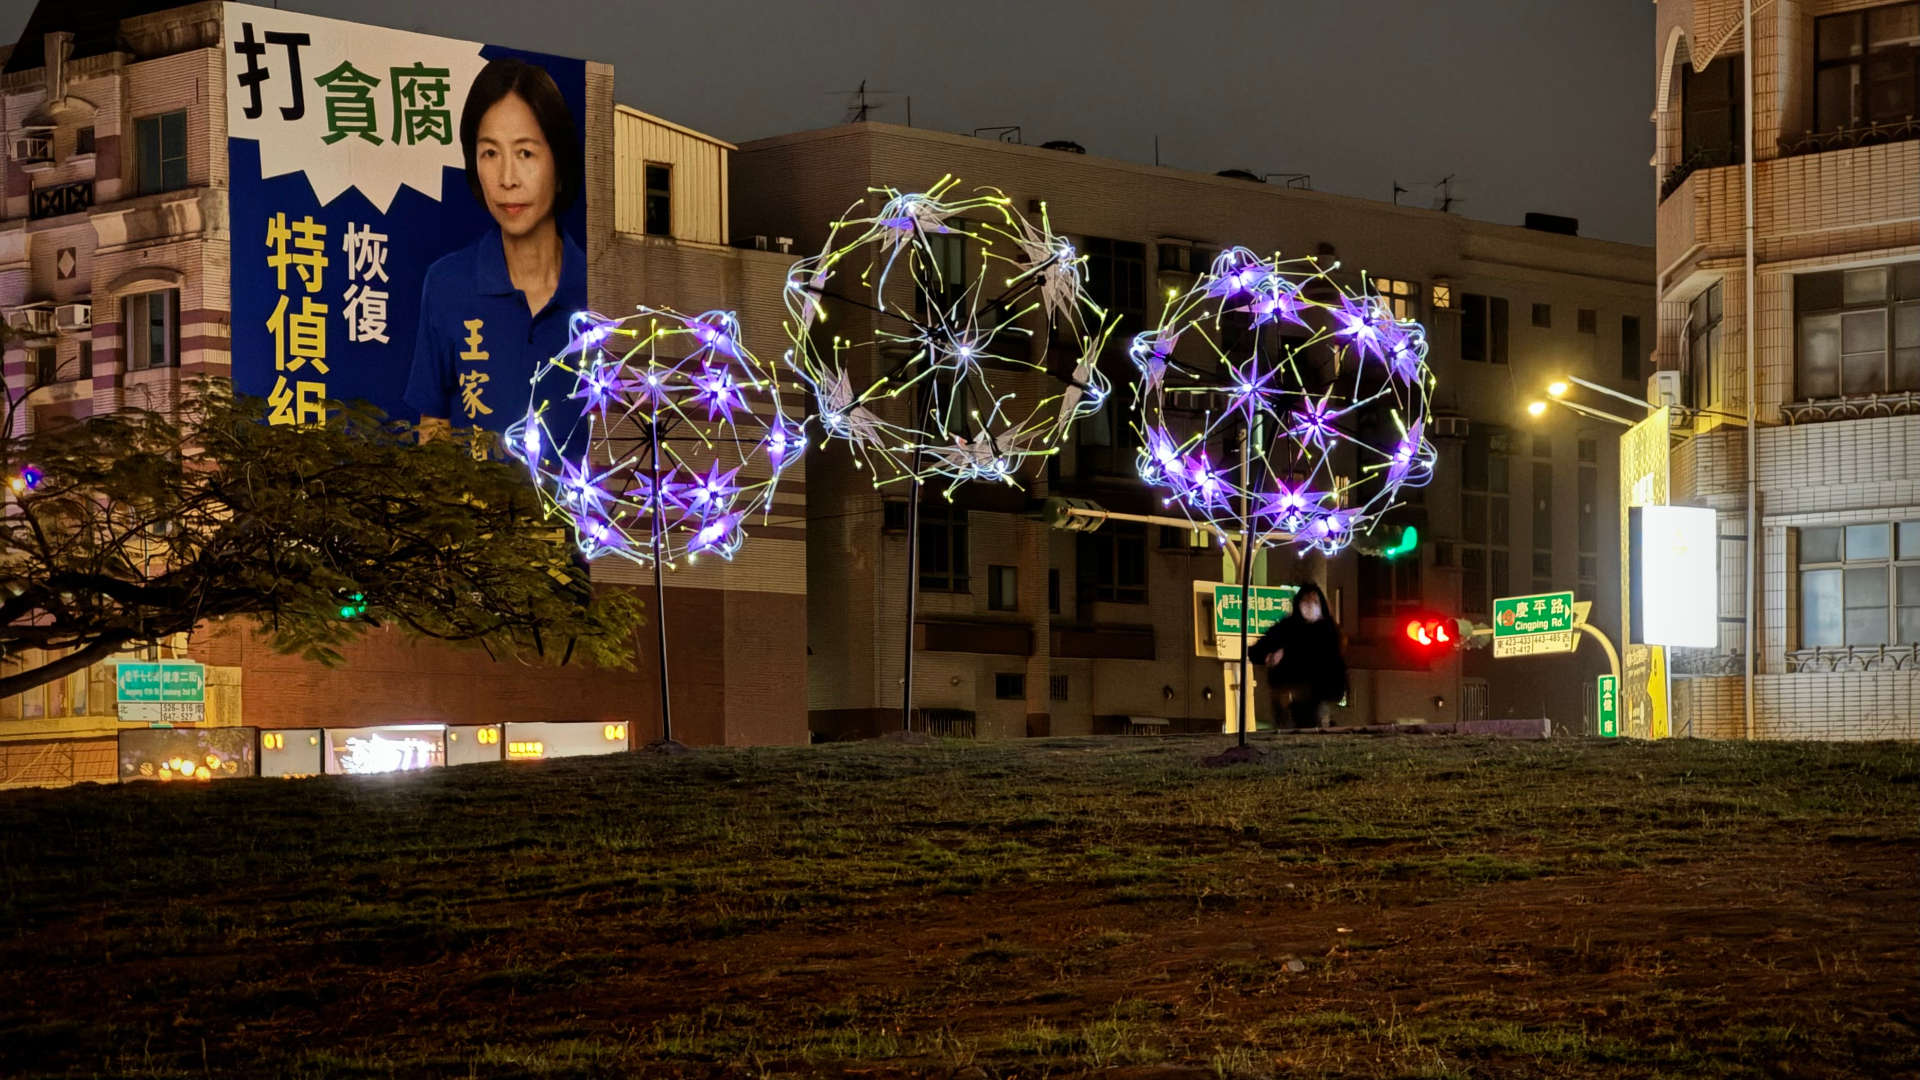 Three abstract sculptures shaped like enormous metal dandelions.